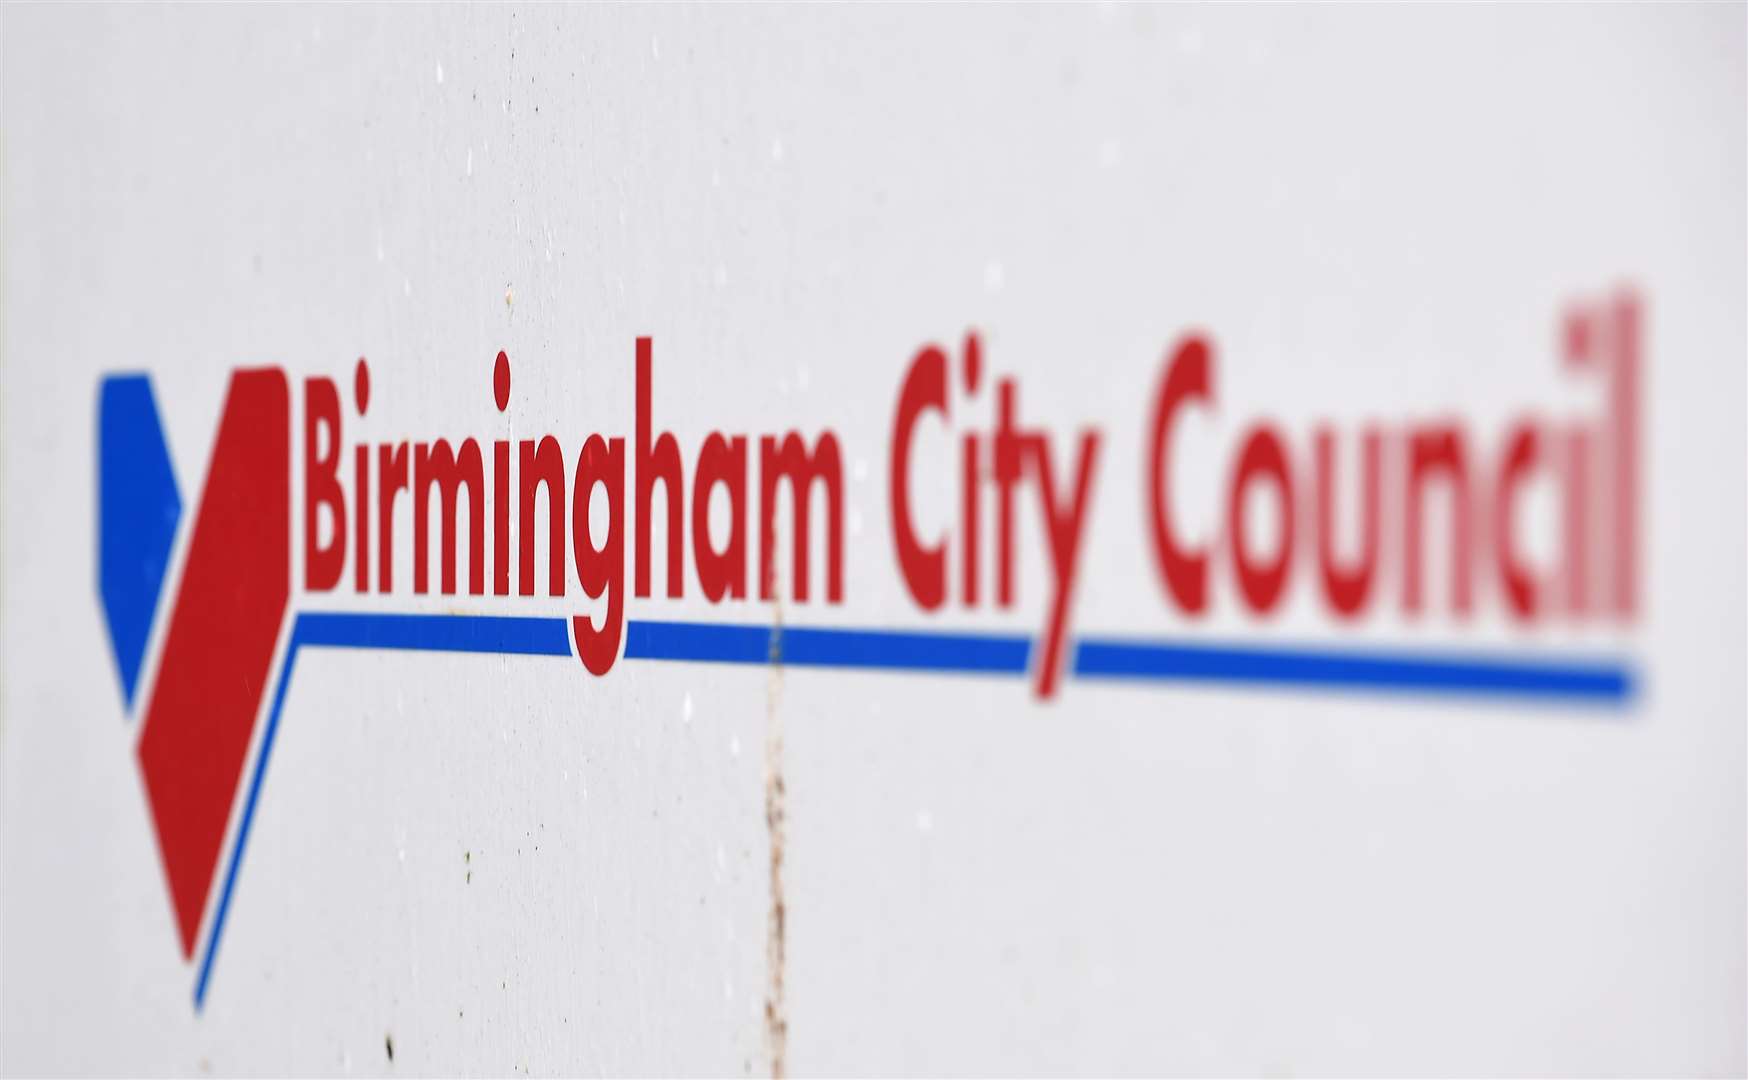 Birmingham City Council is the latest of several authorities to issue a section 114 notice since the turn of the century (Joe Giddens/PA)